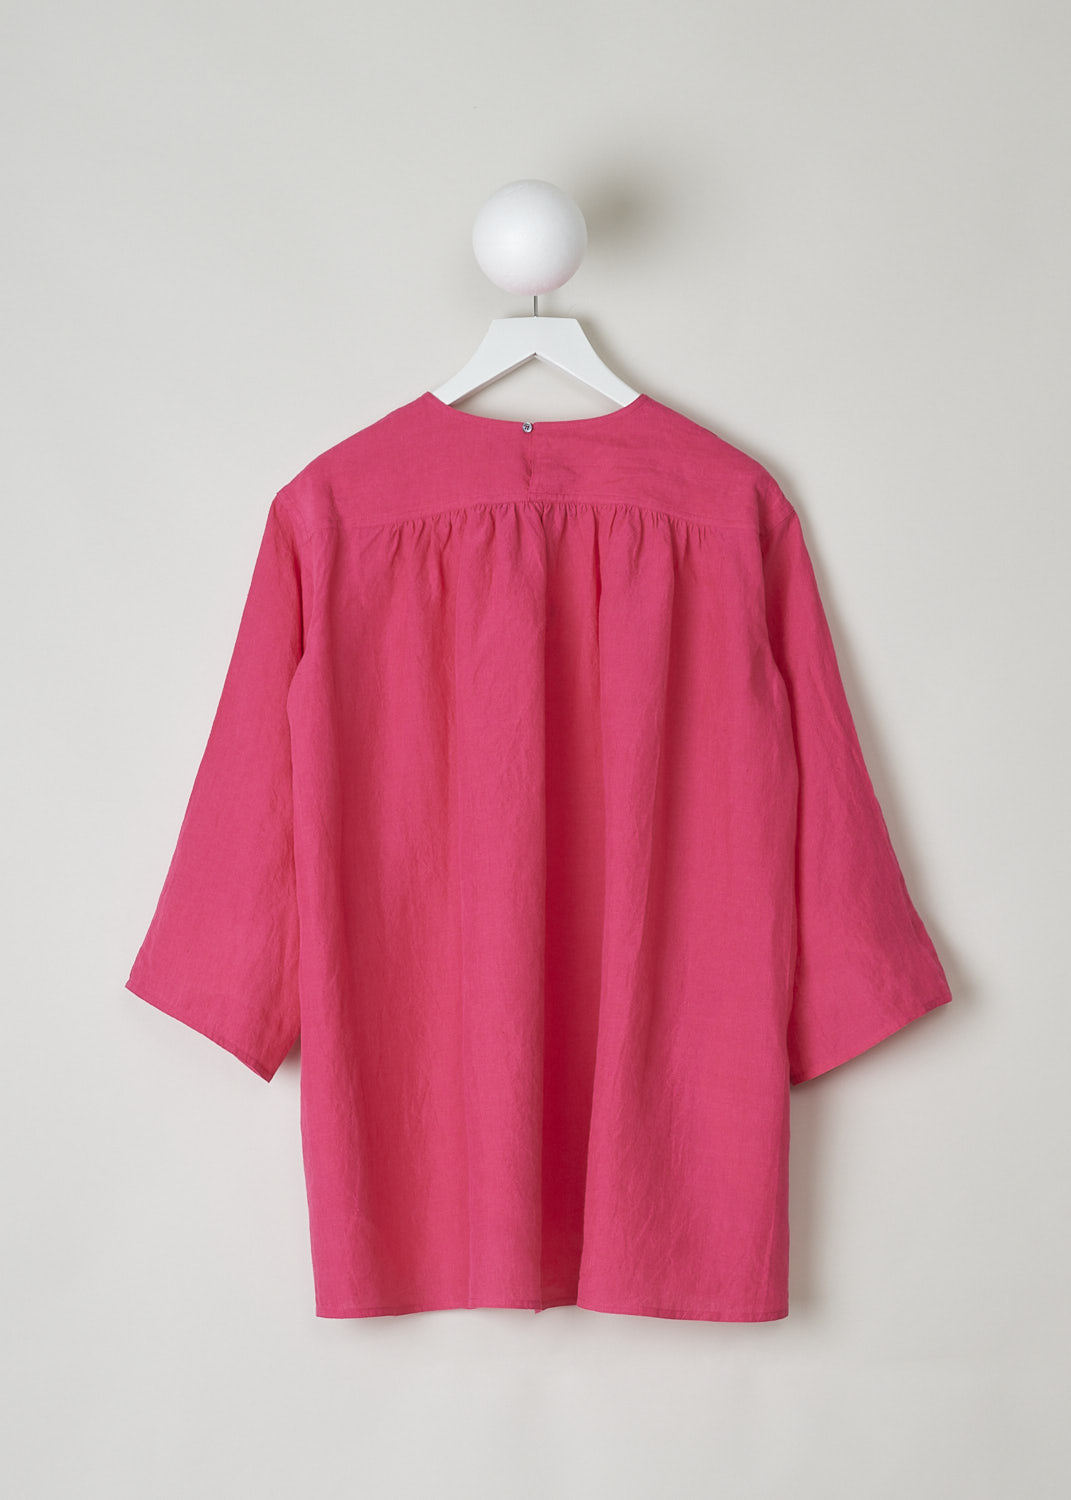 SOFIE D’HOORE, FUCHSIA COLORED BINETTE TOP, BINETTE_LIFE_FUCHSIA, Pink, Back, This oversized fuchsia top features a round neckline, dropped shoulders and long sleeves. The A-line top has a square bib-like front with pleated details below. Concealed in the side seams, slanted pockets can be found. The top has an asymmetrical finish, meaning the back is a little longer than the front. 

